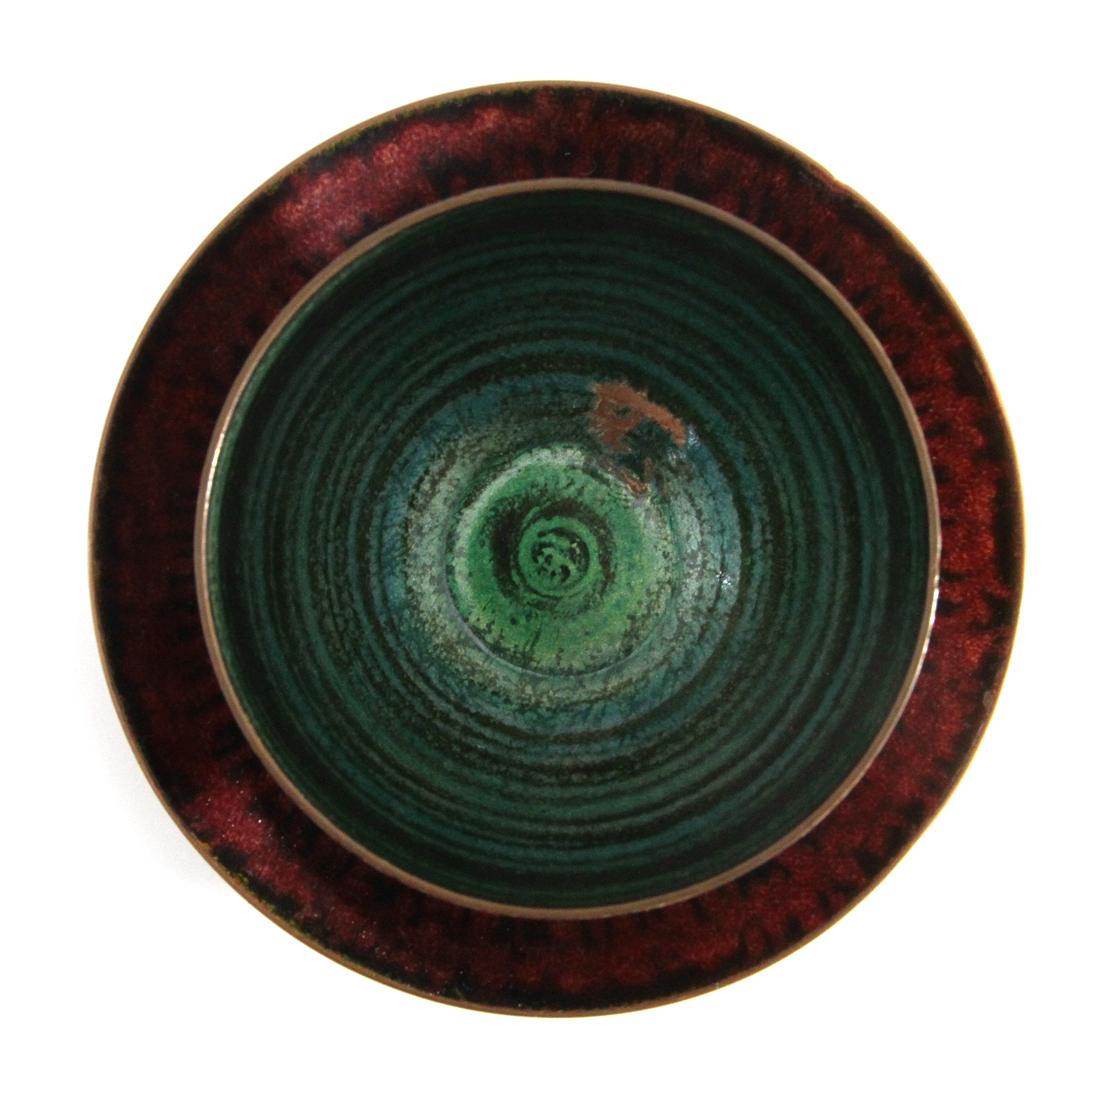 Pair of bowls produced by the Vigna Nuova Gallery in Florence in the 1950s and made by Sergio Santi.
Enamelled copper structure.
Good general conditions, some signs and lacks of enamel due to normal use over time.

Dimensions: diameter 12.5 cm -